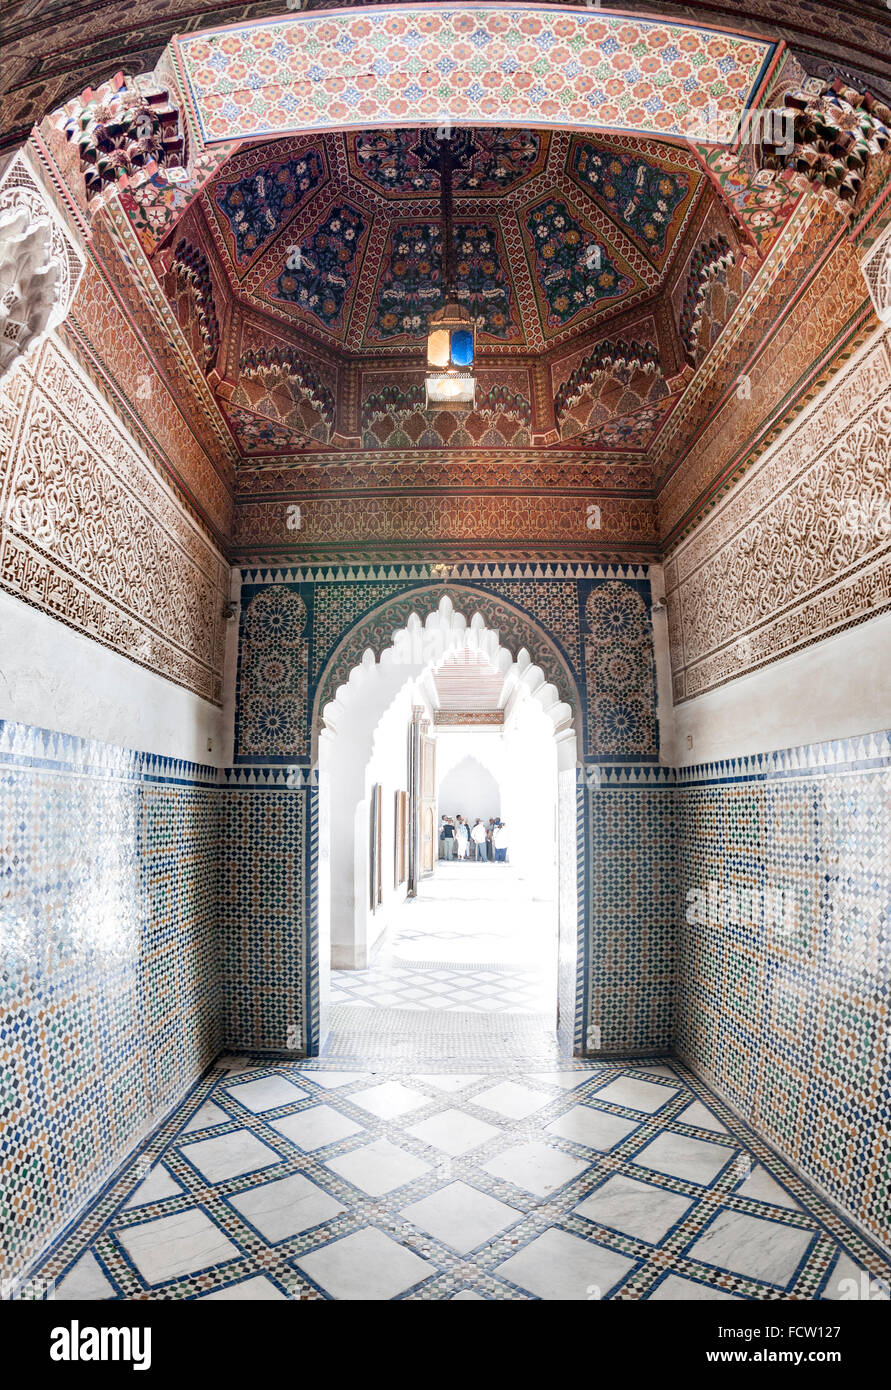 Alcove and courtyard of the Bahia Palace in Marrakech, Morocco. Stock Photo